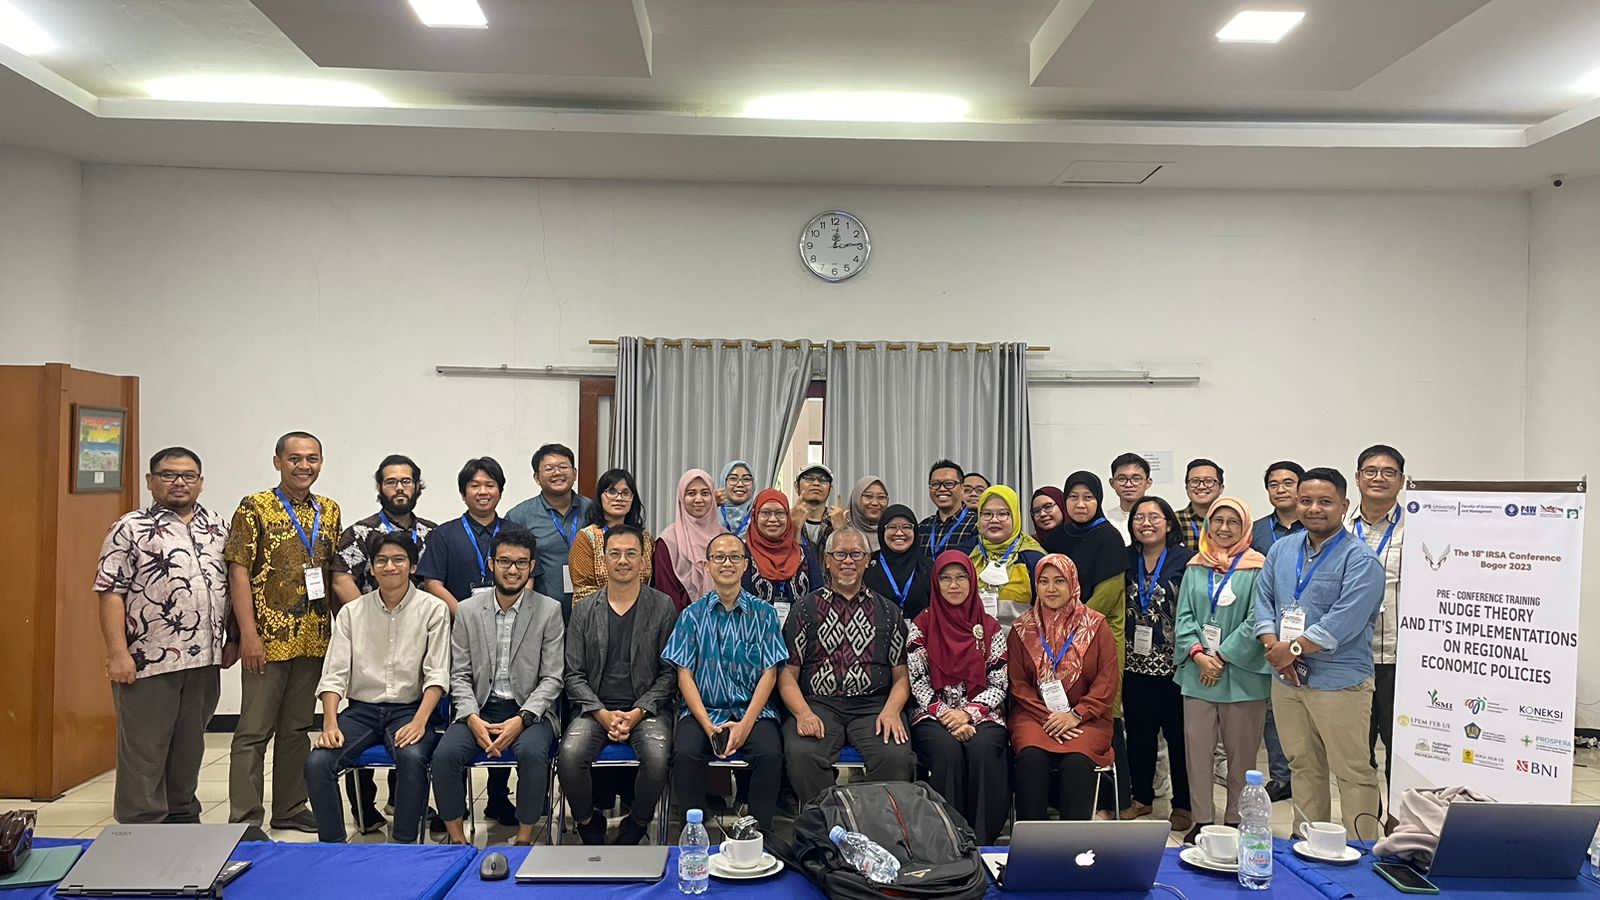 Day 1 Kegiatan 18th IRSA Pre-conference Workshop 2023 “Nudge Theory & It’s Implementations on Regional Economic Policies”